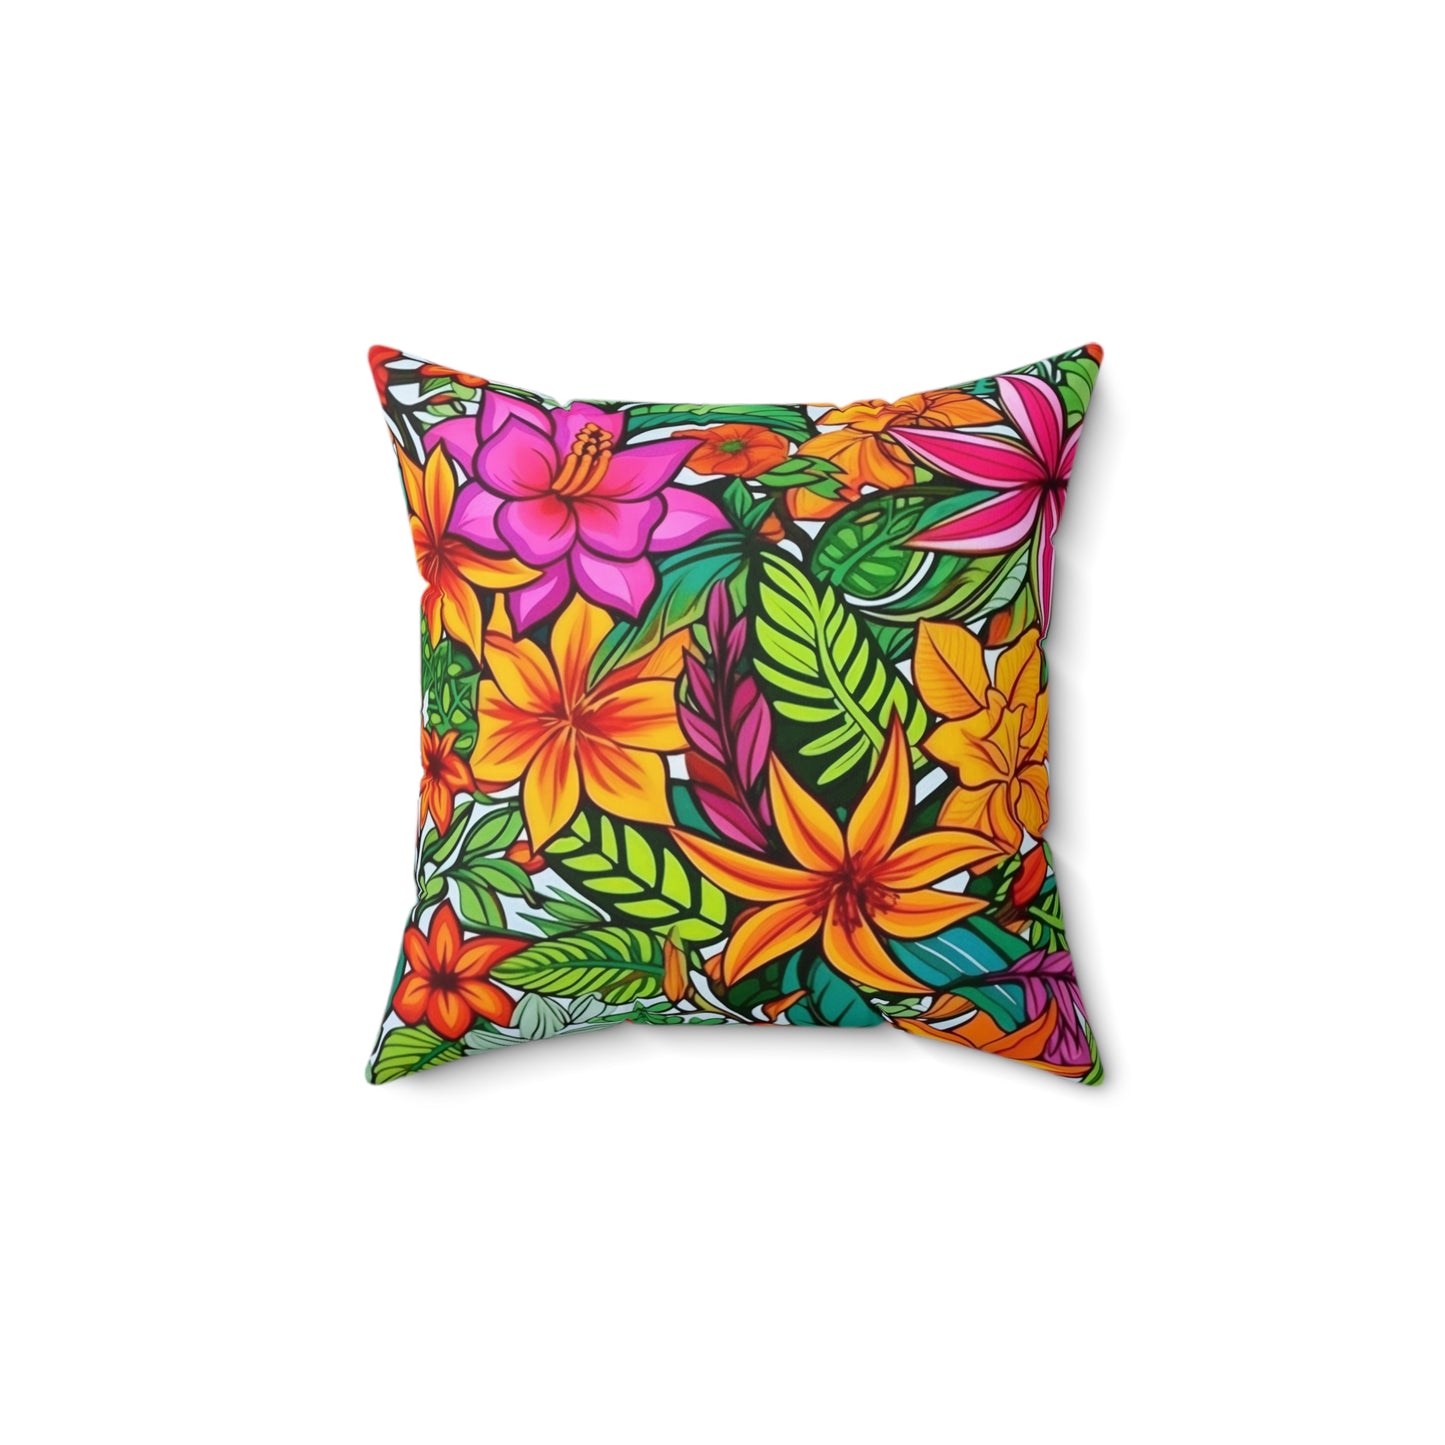 Vibrant Floral Throw Pillow, Orange and Pink Tropical Flowers Pillow, Unique Square Cushion, Concealed Zipper